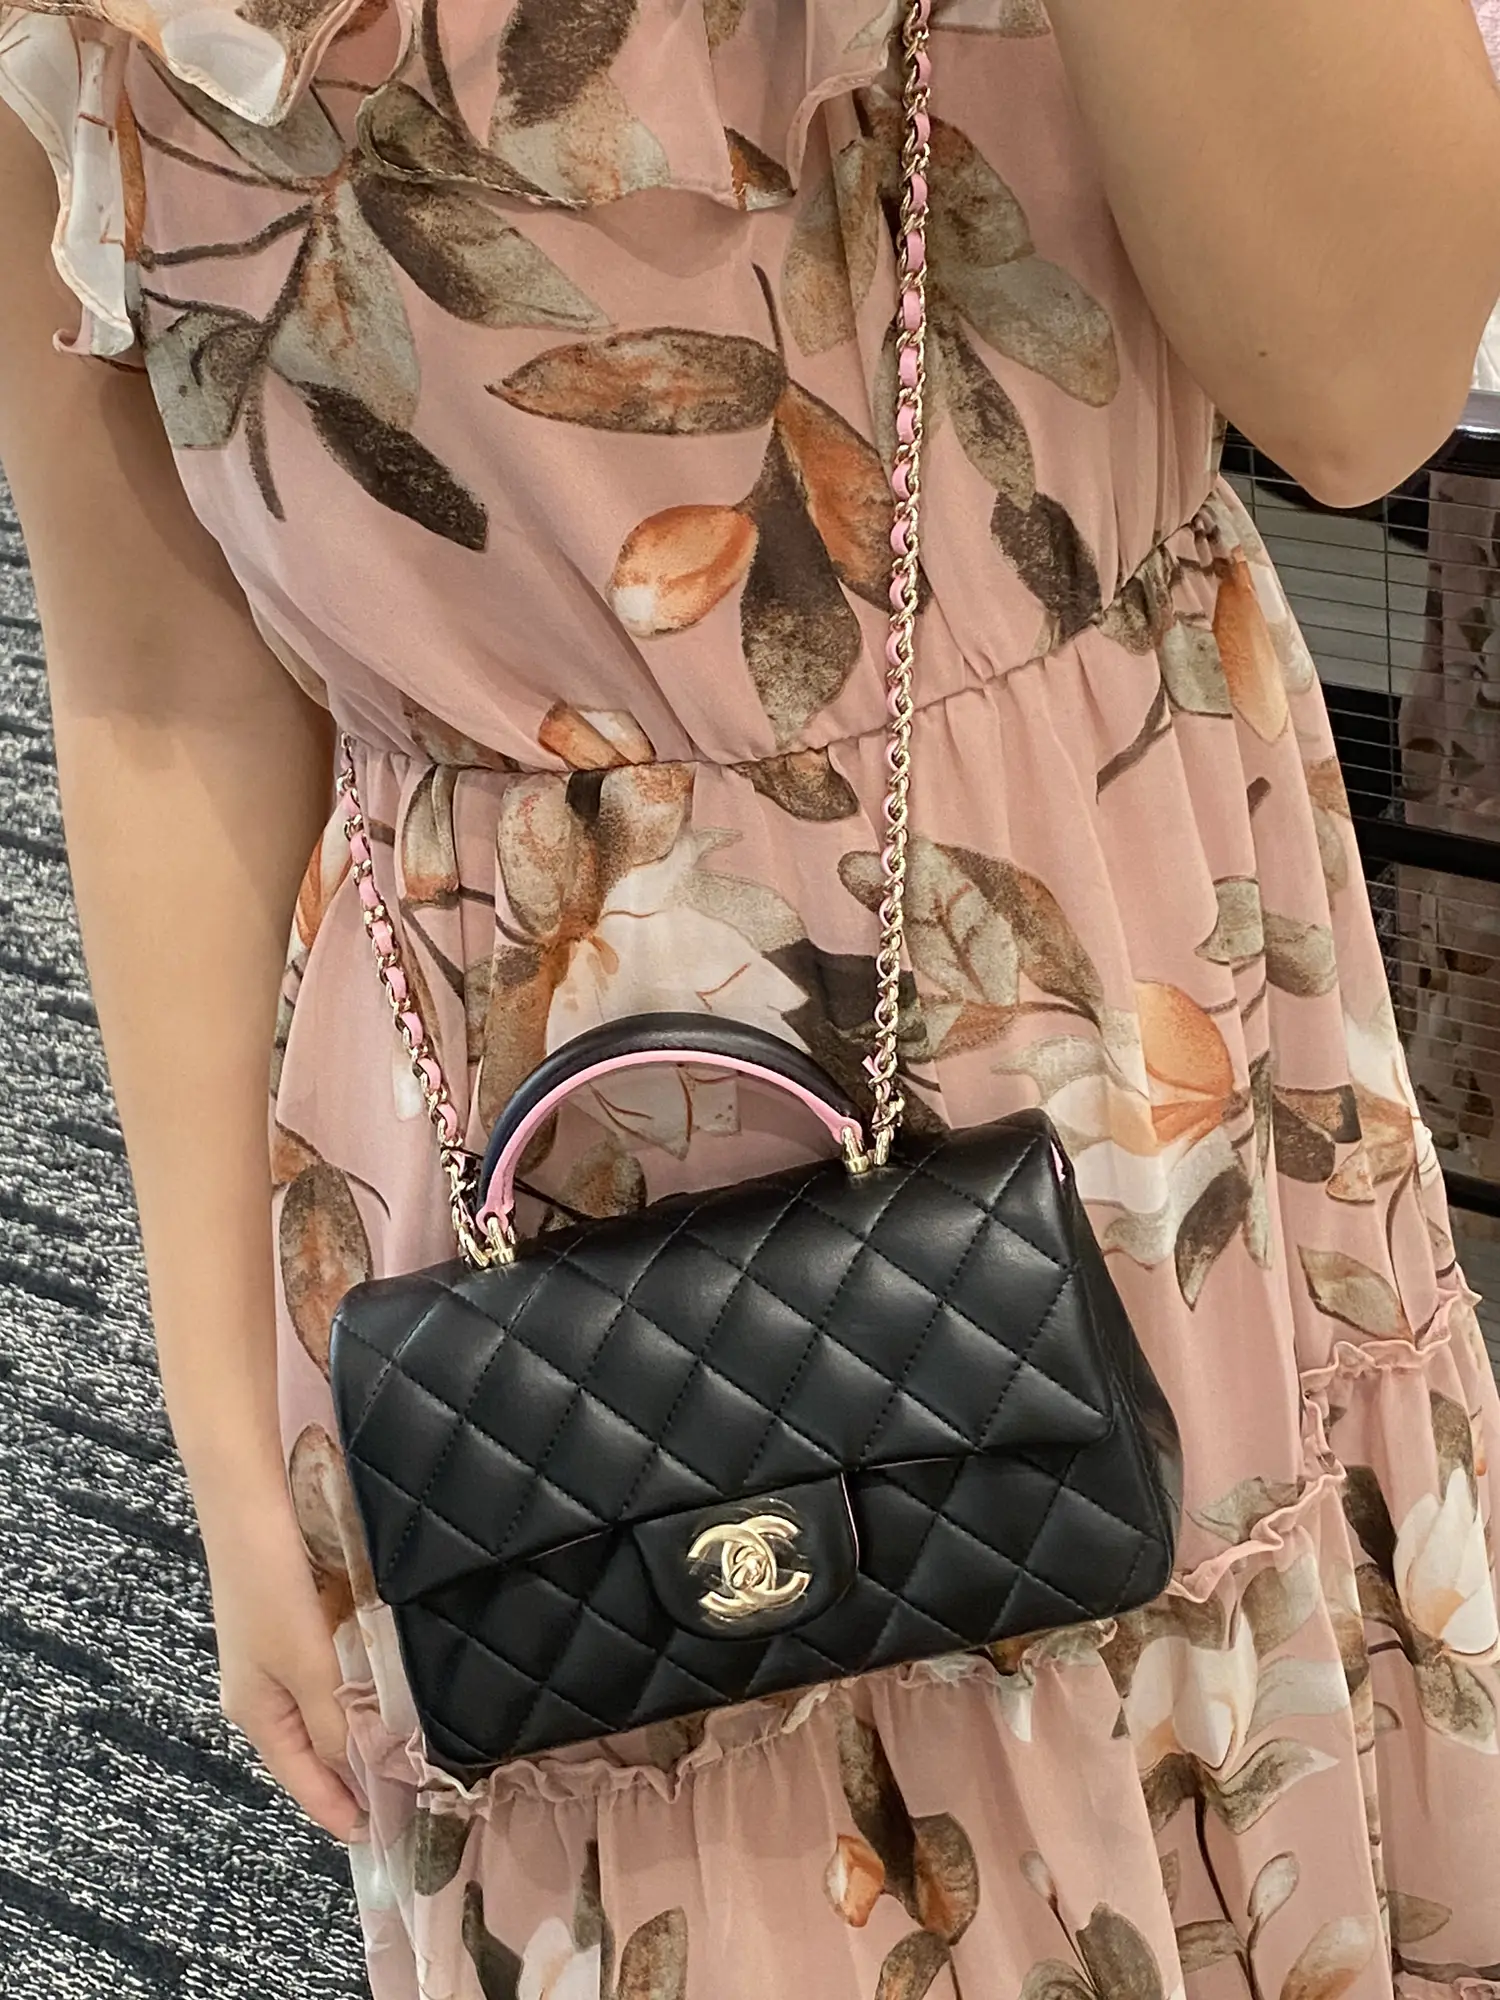 Chanel 23P Bag Tryons!, Gallery posted by etherealpeonies